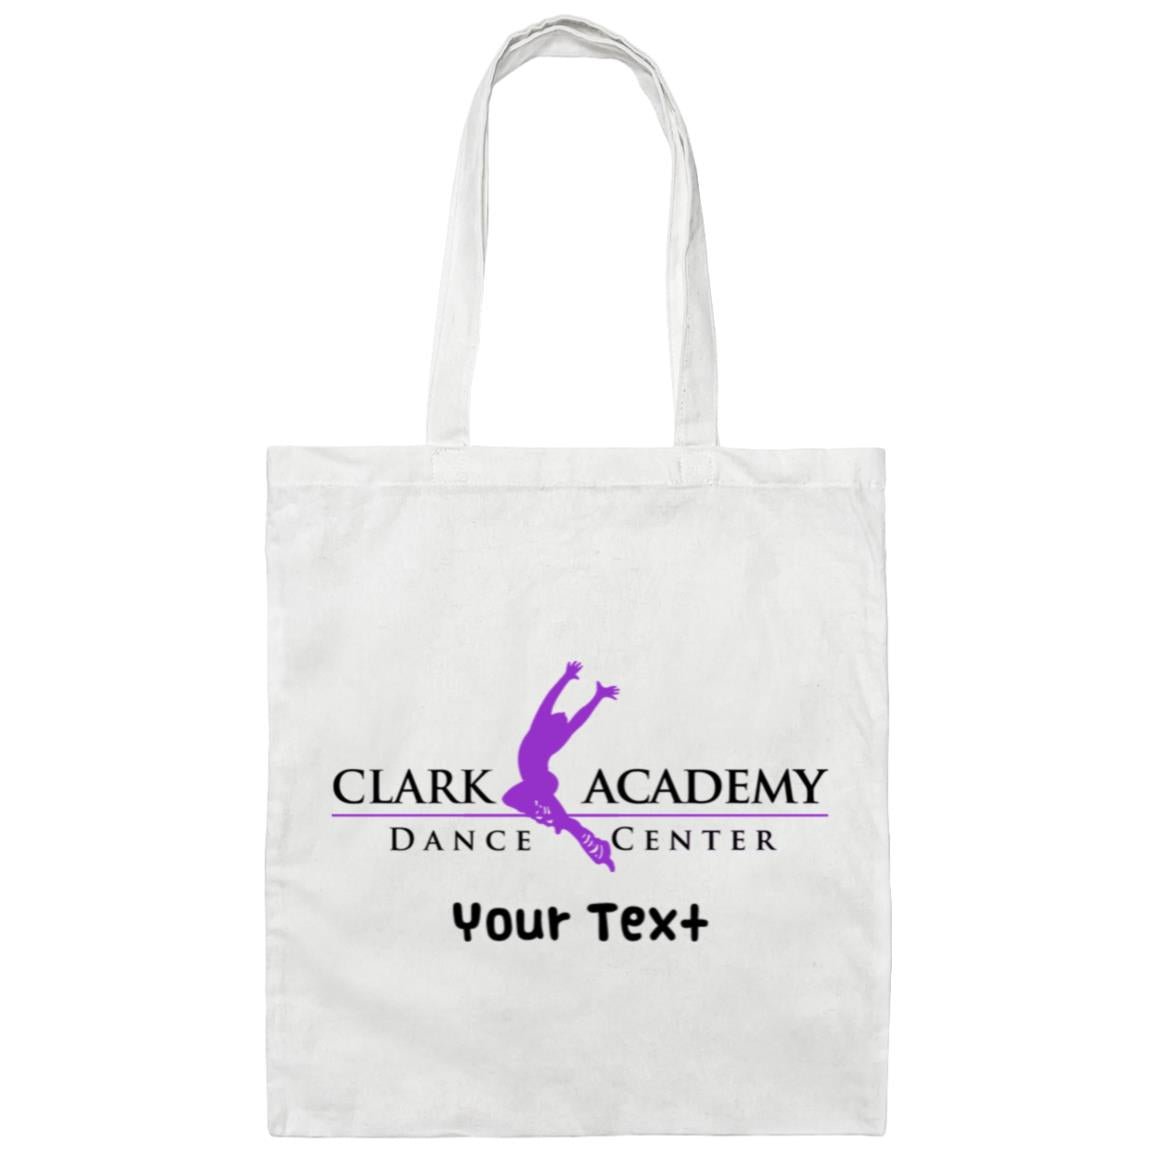 CADC Canvas Tote Bag - Free Personalization